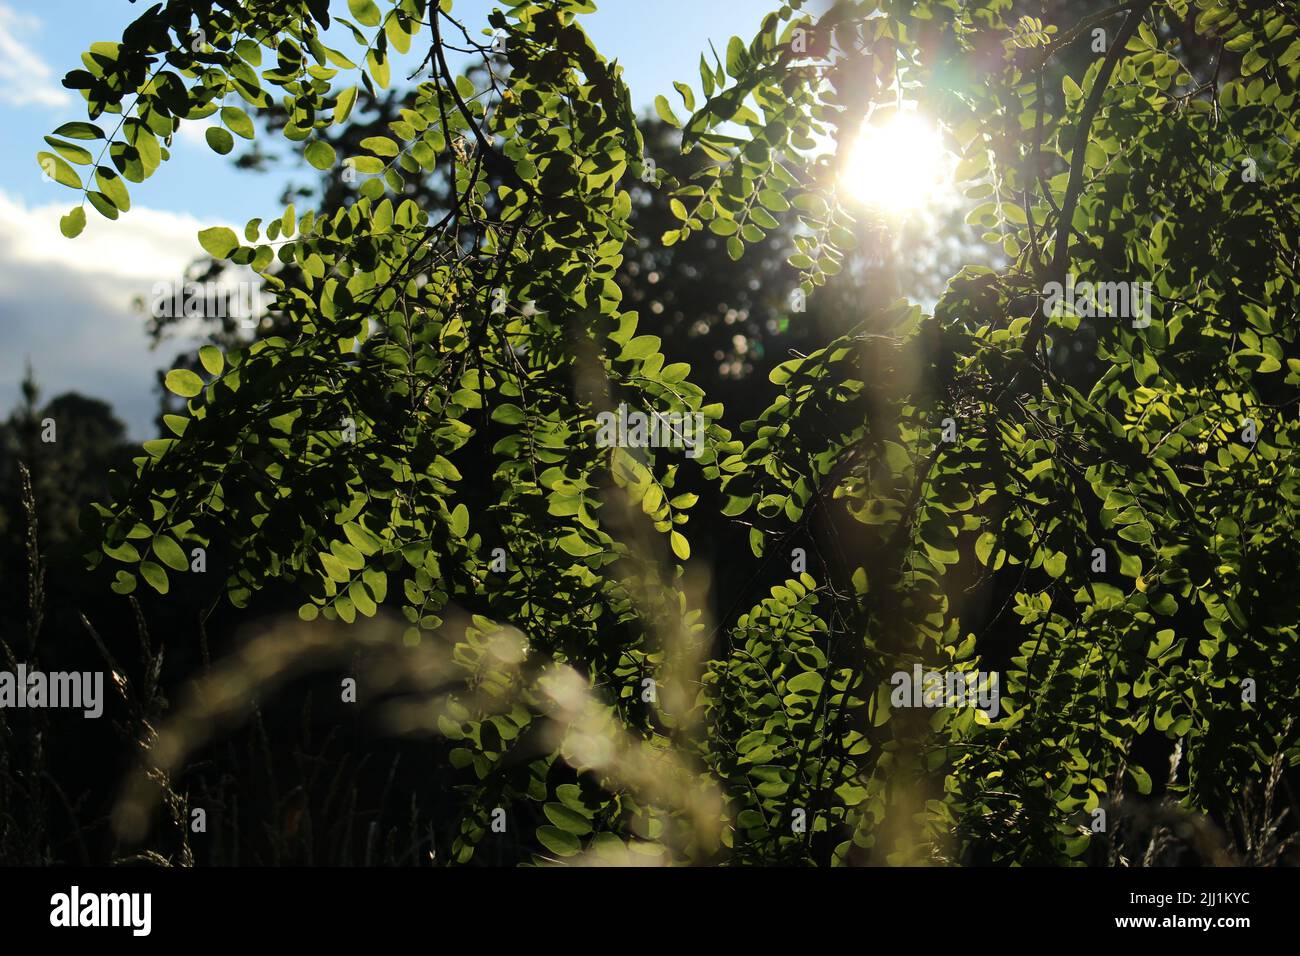 Black Locust tree (Robinia pseudoacacia) - commonly referred to as False Acacia - Green summer leaves backlit buy a late summer sun Stock Photo